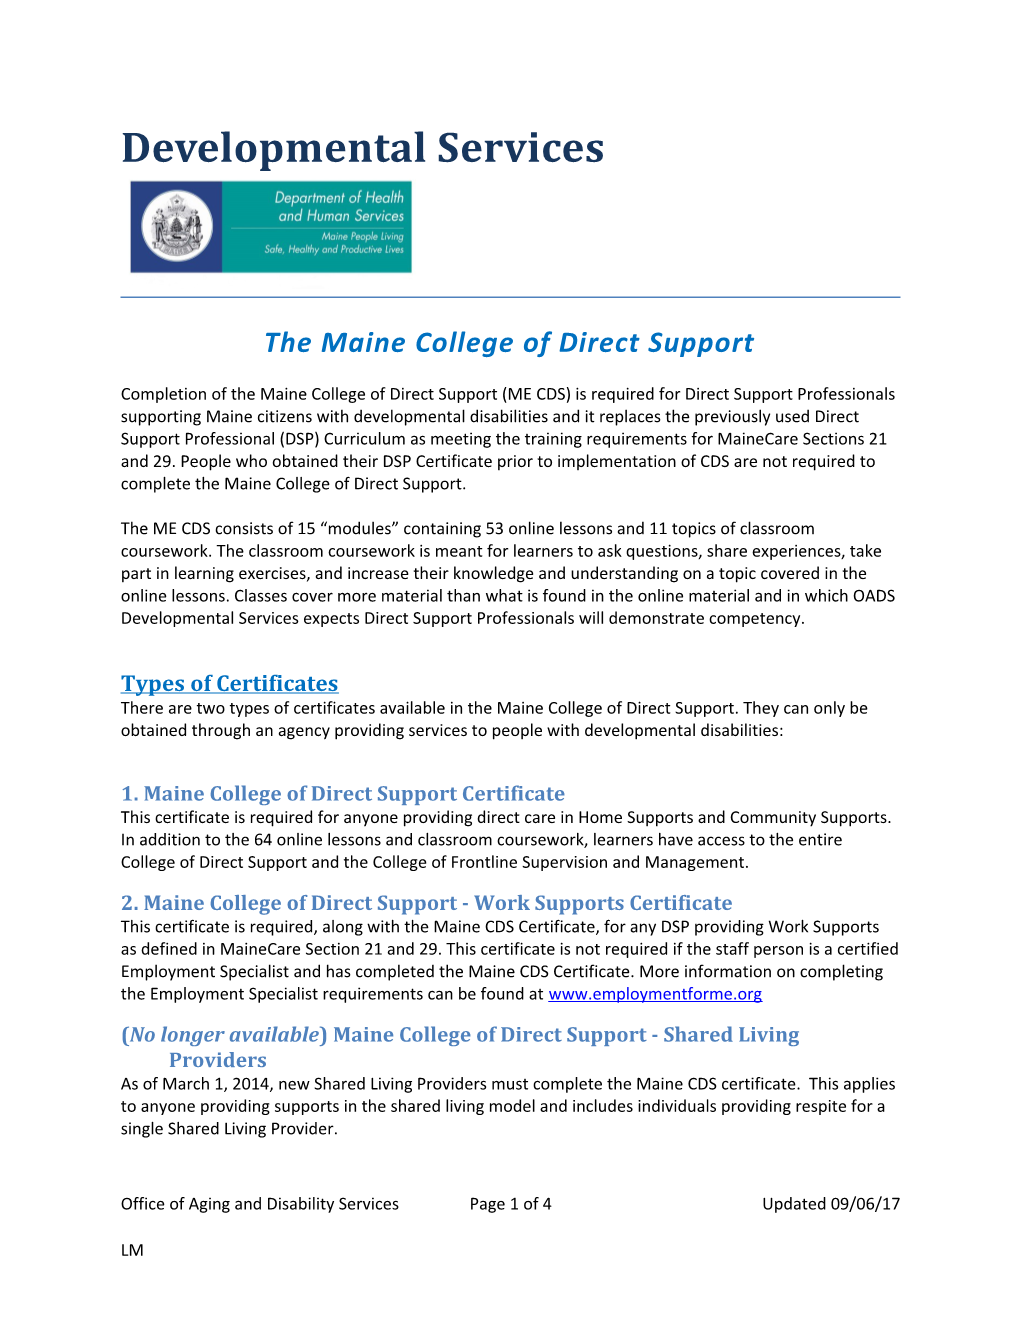 The Maine College of Direct Support